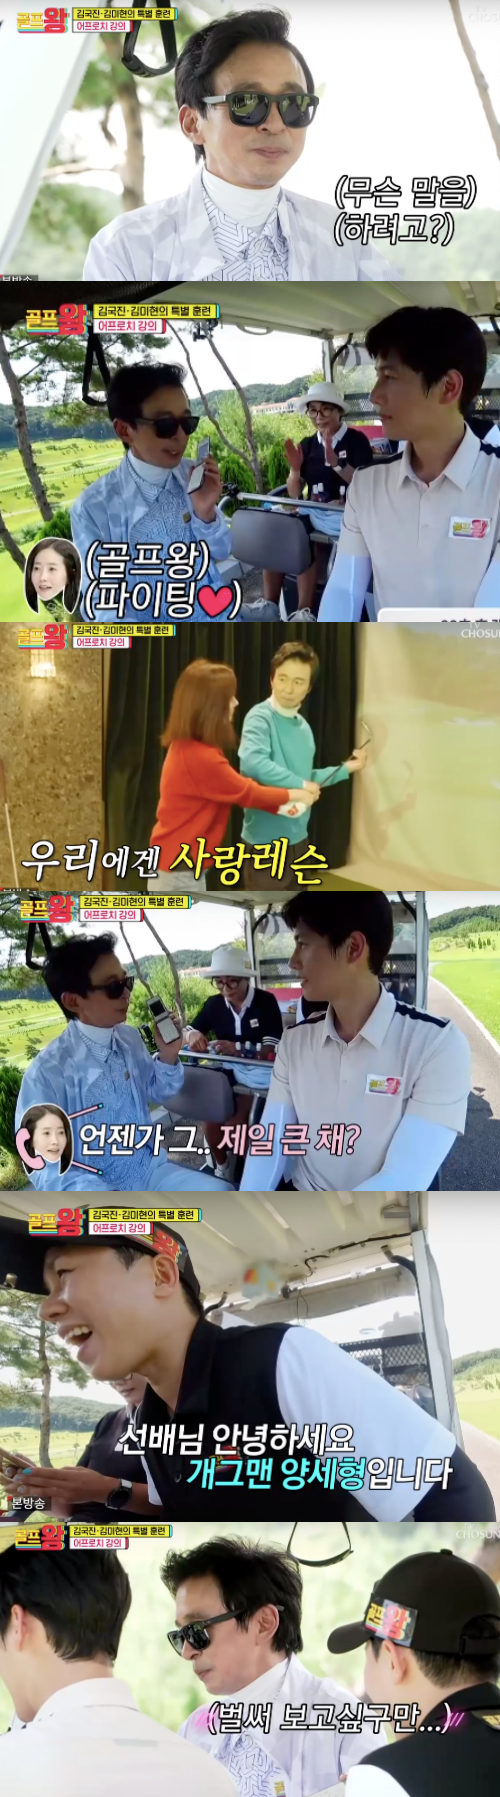 Kang Susie, who cheers Kim Gook Jin in King Golf, appeared in a surprise voice.It was connected to Kang Susie in TV Chosun Golf King broadcast on the 26th.First, the Choi Hong-rim team decided on the team name Fantastic Duo Po on the day, followed by Yang Se-hyeong, Jang Min-Ho, Lee Sang-woo and Lee Dong-gook.Kim Gook Jin joined late ahead of full-scale Battle.Choi Hong-rim said, Protest day, Kook Jin told me to do my best to the end, and if I give up in the middle, I should not contact me. I was shocked and saw the teaching protest then.The game went on: Lee Hyung-chul and Jang Min-Ho Battle, eventually Jang Min-Ho, lost.Next was a mini-game with Yang Se-hyeong and Choi Hong-rim challenging, suddenly spreading to Hunming Jeongeum Battle, which was a rule that only Korean should be used, not English.Golf King members donated 200,000 won, Fantastic Duo Po members donated 240,000 won.In earnest, Choi Hong-rim and Kim Gook Jins Battle unfolded.Yang Se-hyeong suggested, How about kneeling to the winner, and Choi Hong-rim won while all shouted Big Jam, Honey Jam, Nuclear Honey Jam.Kim Gook Jin kneeled as promised, acknowledging coolly in front of the game.Finally, the Battle of Go Joo-won and Lee Dong-gook unfolded, and both of them admired the physicals, saying, It is like a tour pro, a European player.Suddenly heavy rains poured in and became underwater; following Go Joo-won, Lee Dong-gook followed, especially Lee Dong-gook, who became the first birdie of King Golf.All of them were first eagle. All of them cheered for the first time, saying, Lee Dong-gook, there is nothing that can not be done.Above all, I connected a surprise phone call with Kim Gook Jins wife Kang Susie.Kang Susie was worried that I am suffering from hot weather, Yang Se-hyeong said, Kim Gook Jin has seen Kim Gook Jin, Kim Gook Jin mentioned Kang Susie at home, Is he pretending to be weak? Kang Susie replied, Yang Se-hyeong envied him, saying, I swiped.When Kim Gook Jin, who hangs up the phone at the end of the broadcast, asked Yang Se-hyeong, Do not you do anything like side? Kim Gook Jin answered with a smile without answering.Capture the King Golf broadcast screen